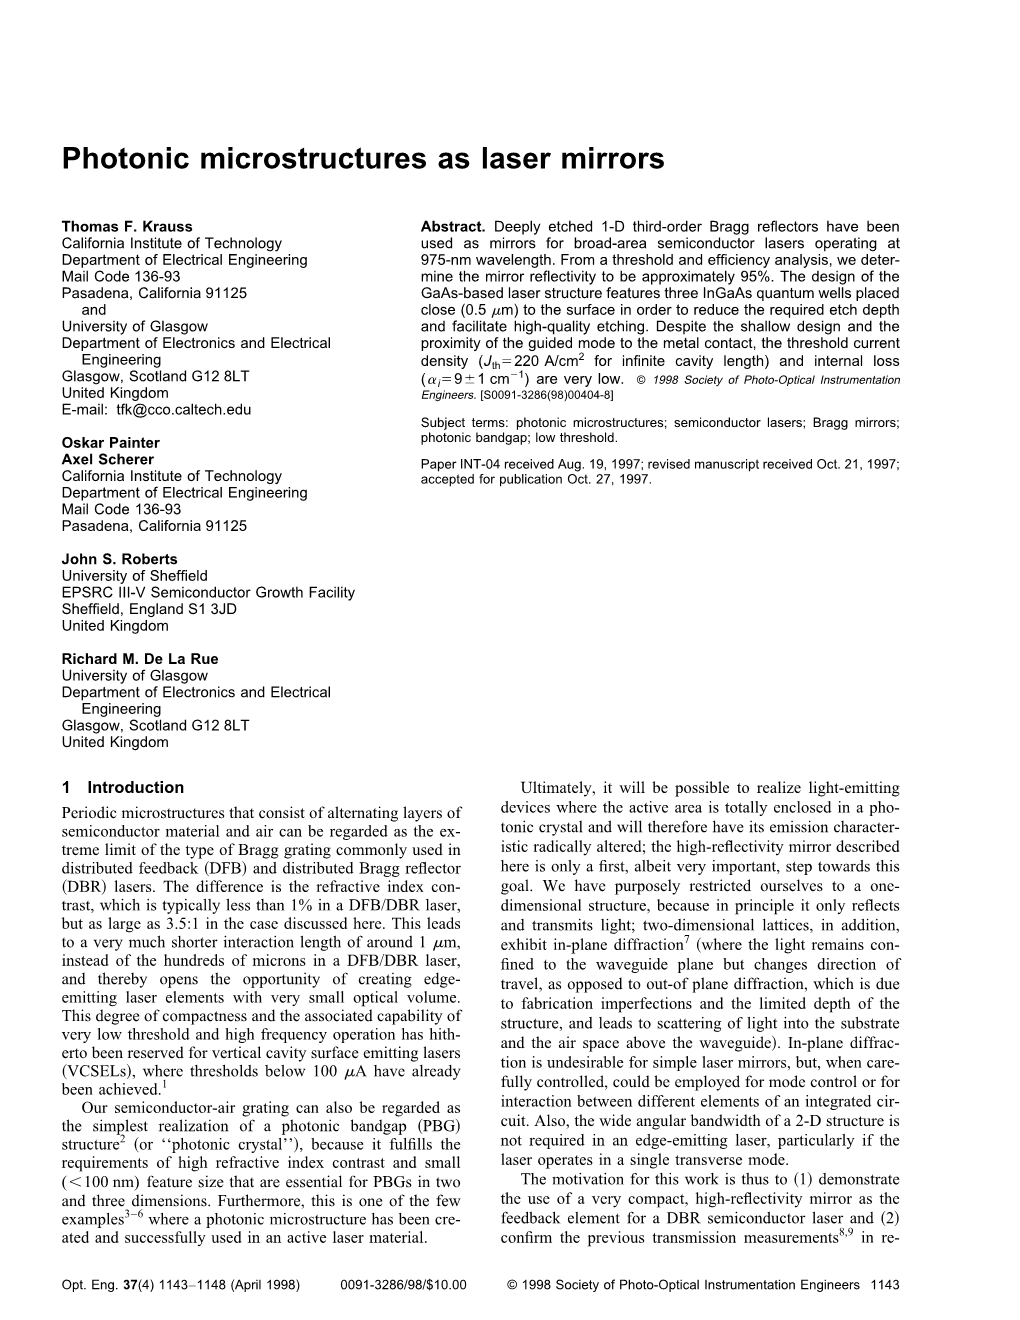 Photonic Microstructures As Laser Mirrors